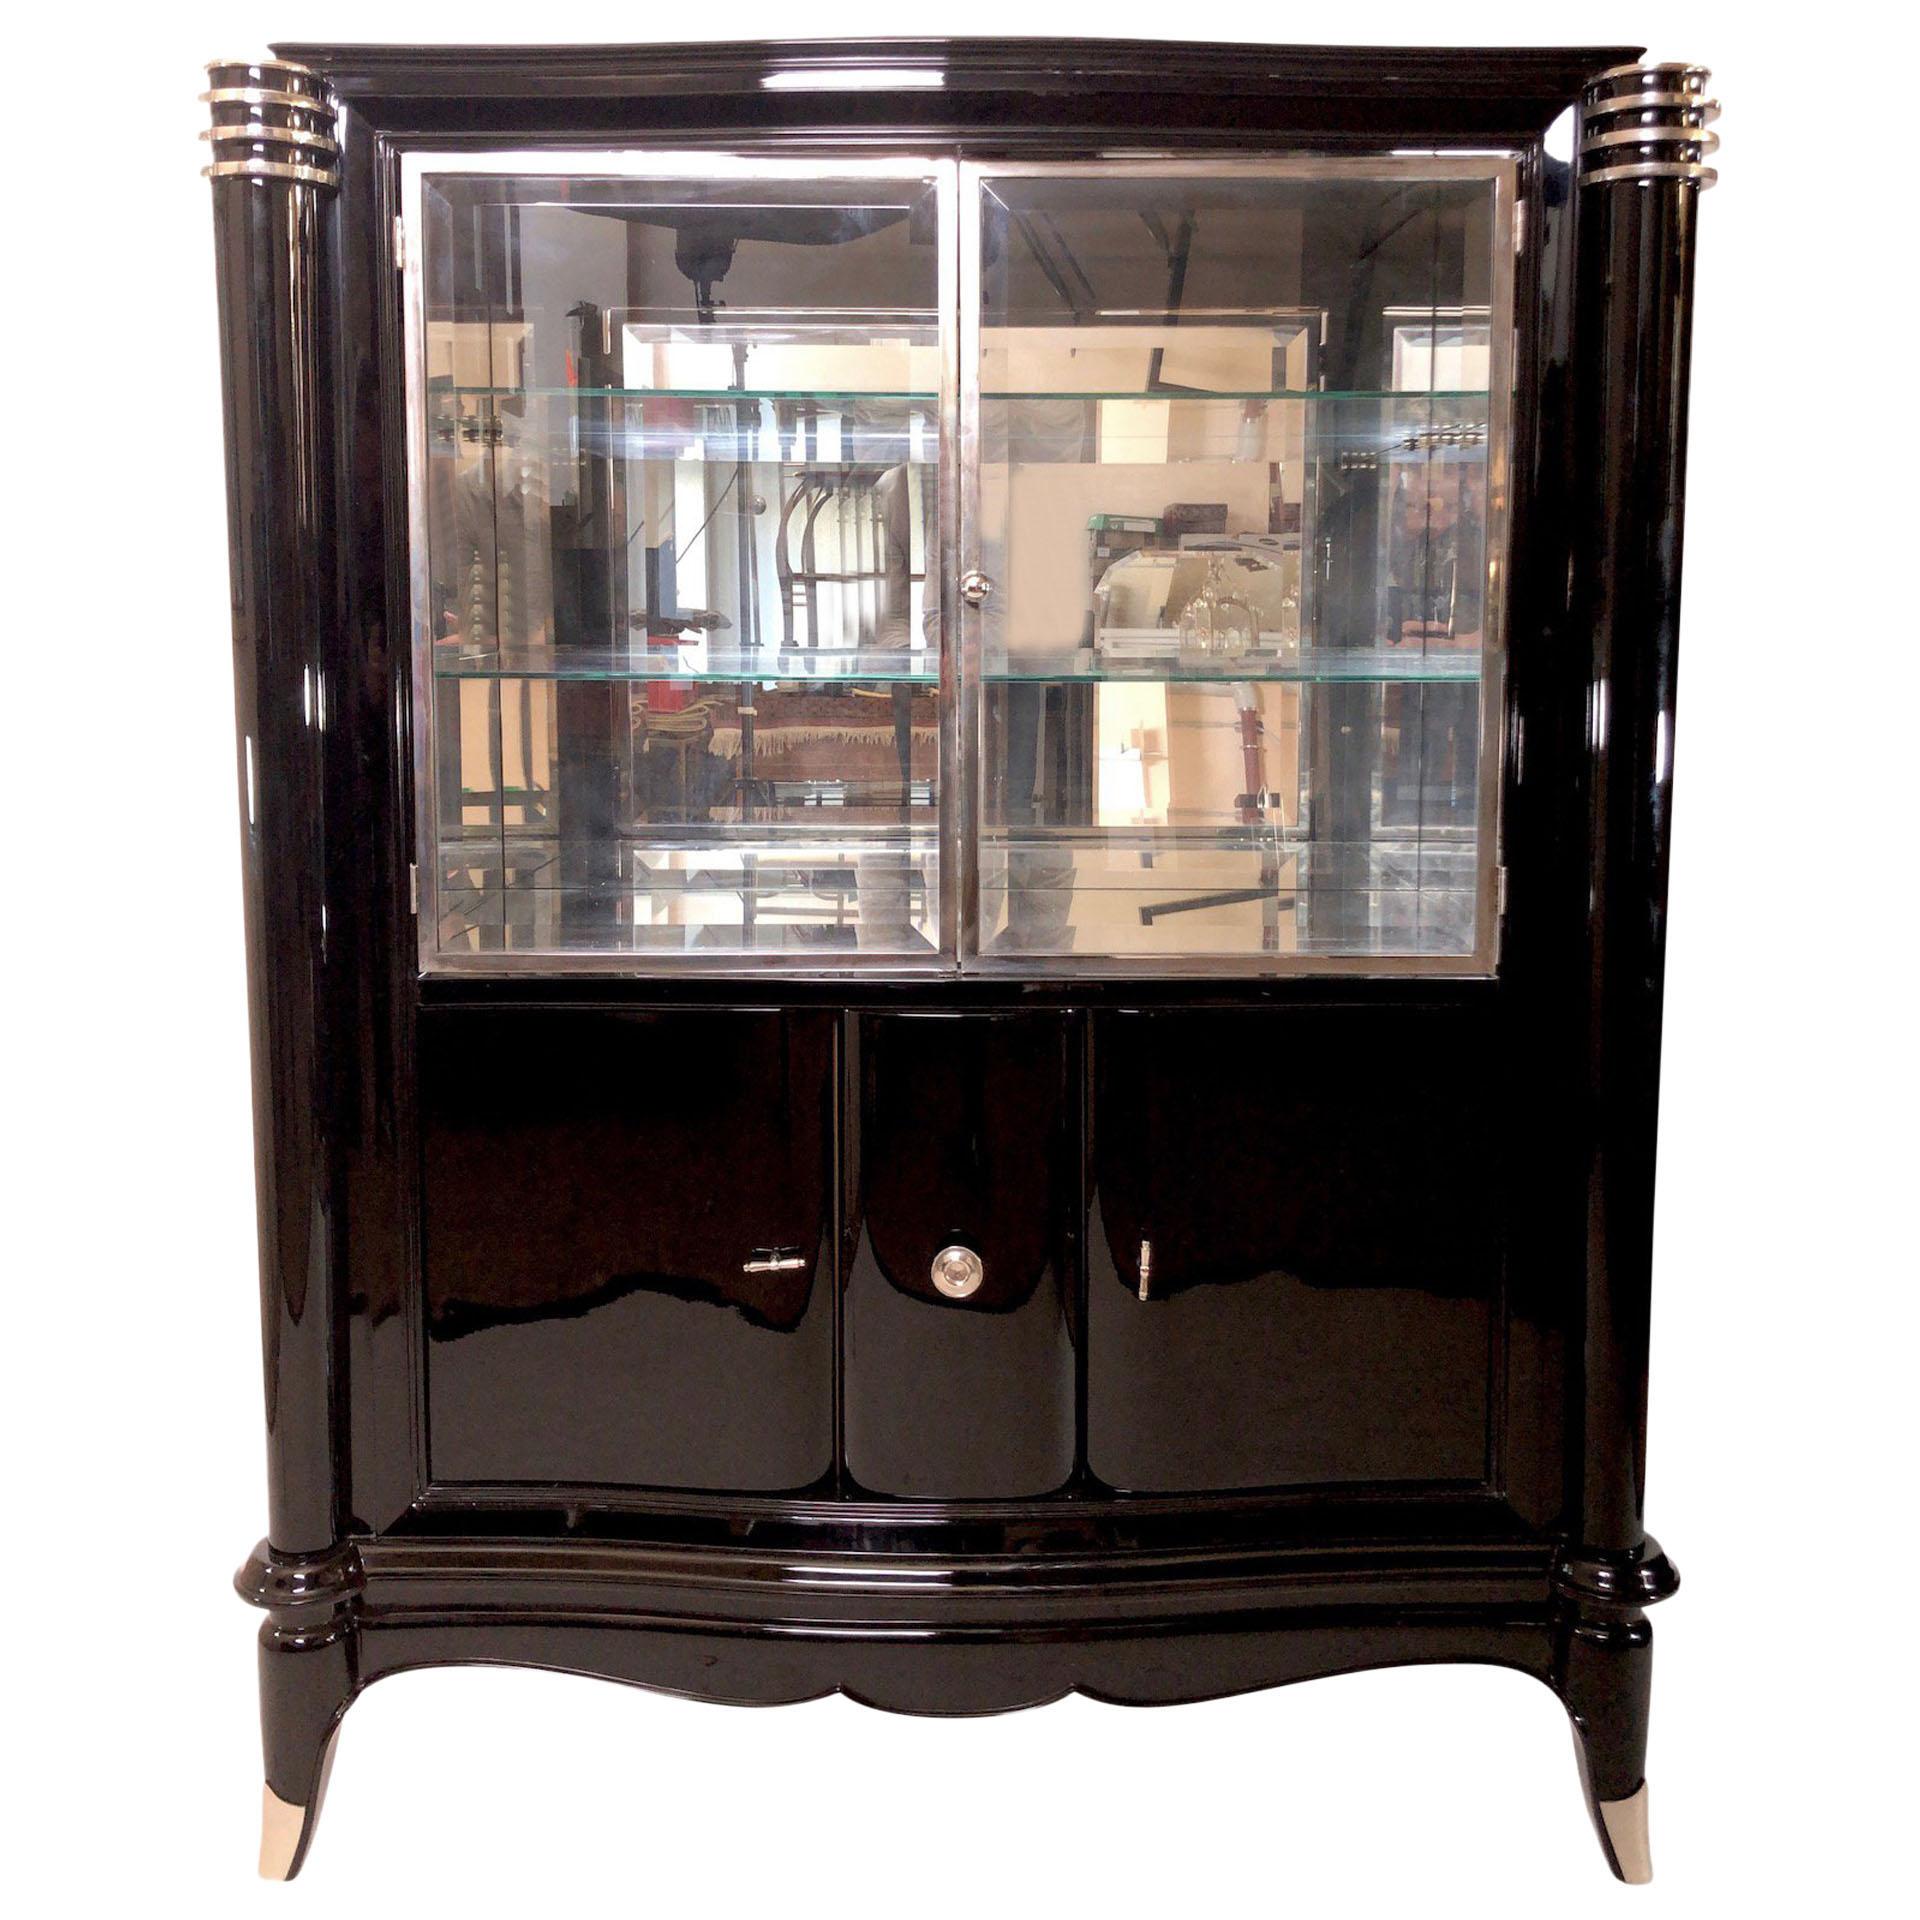 1930s Black Piano Lacquer Vitrine with Dry Bar Original French Art Deco For Sale